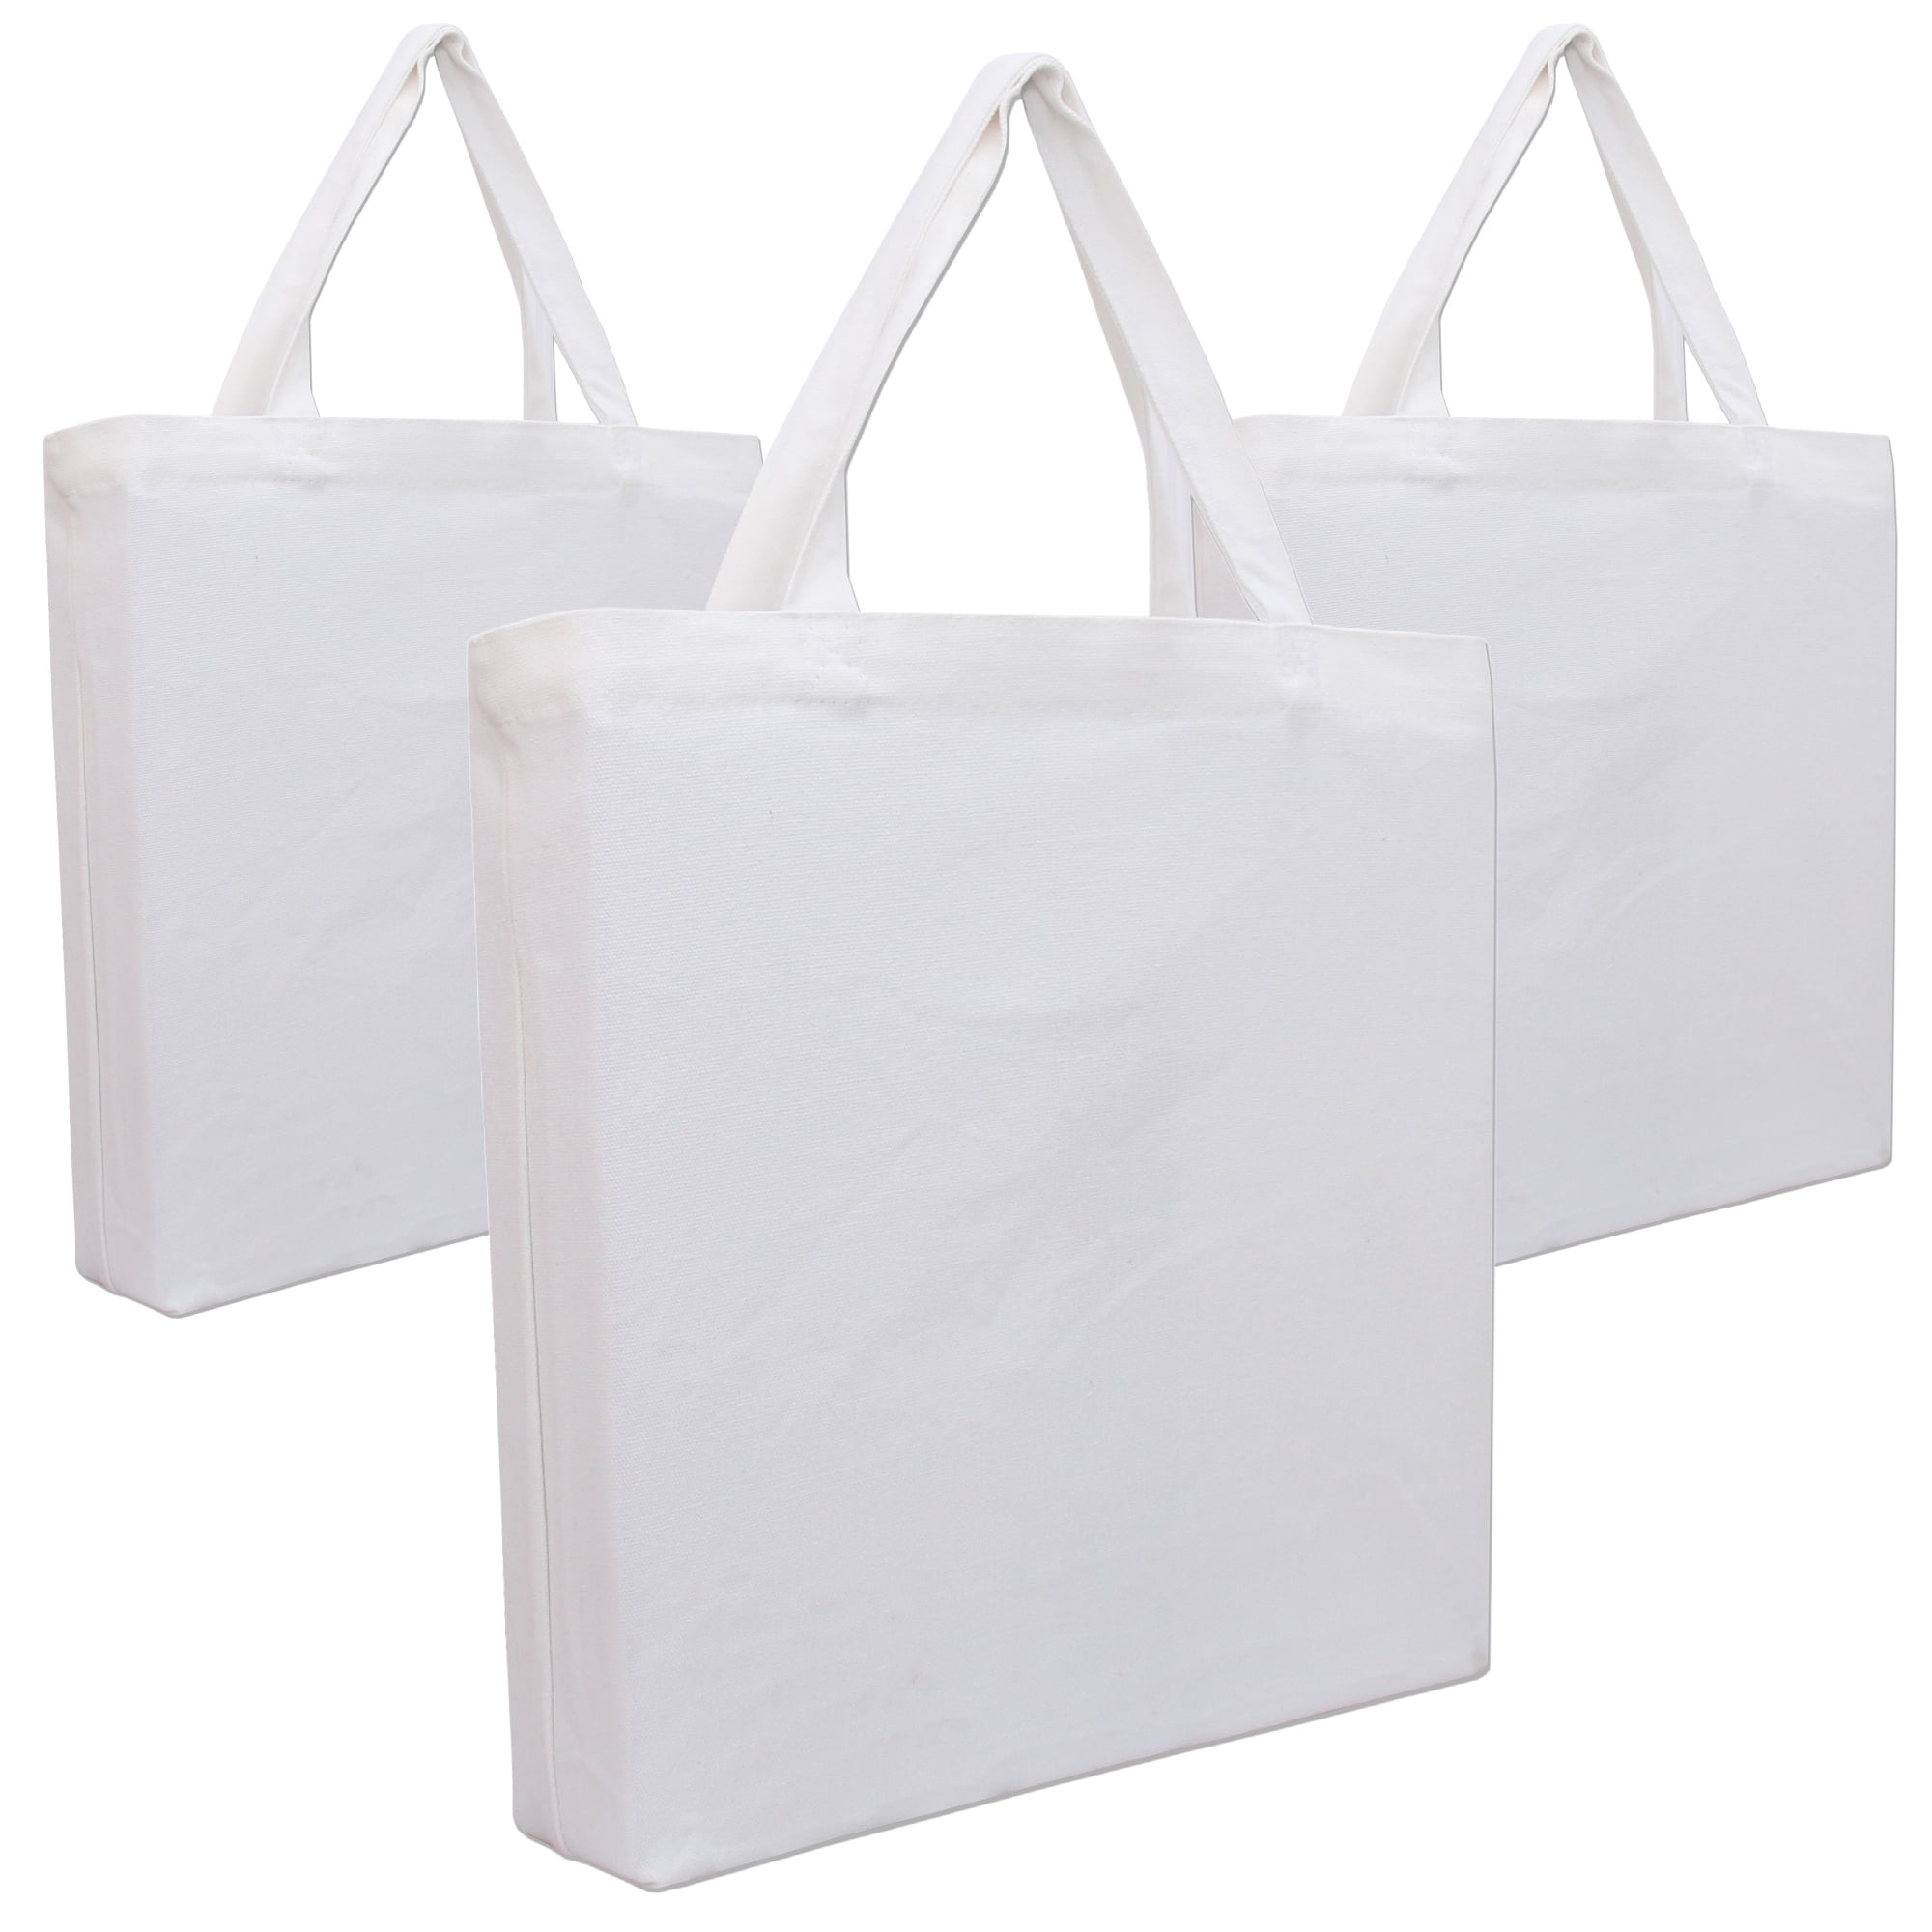 Premium Canvas Tote Bags | Pack of 3 | Heavy Duty 100% Cotton With ...